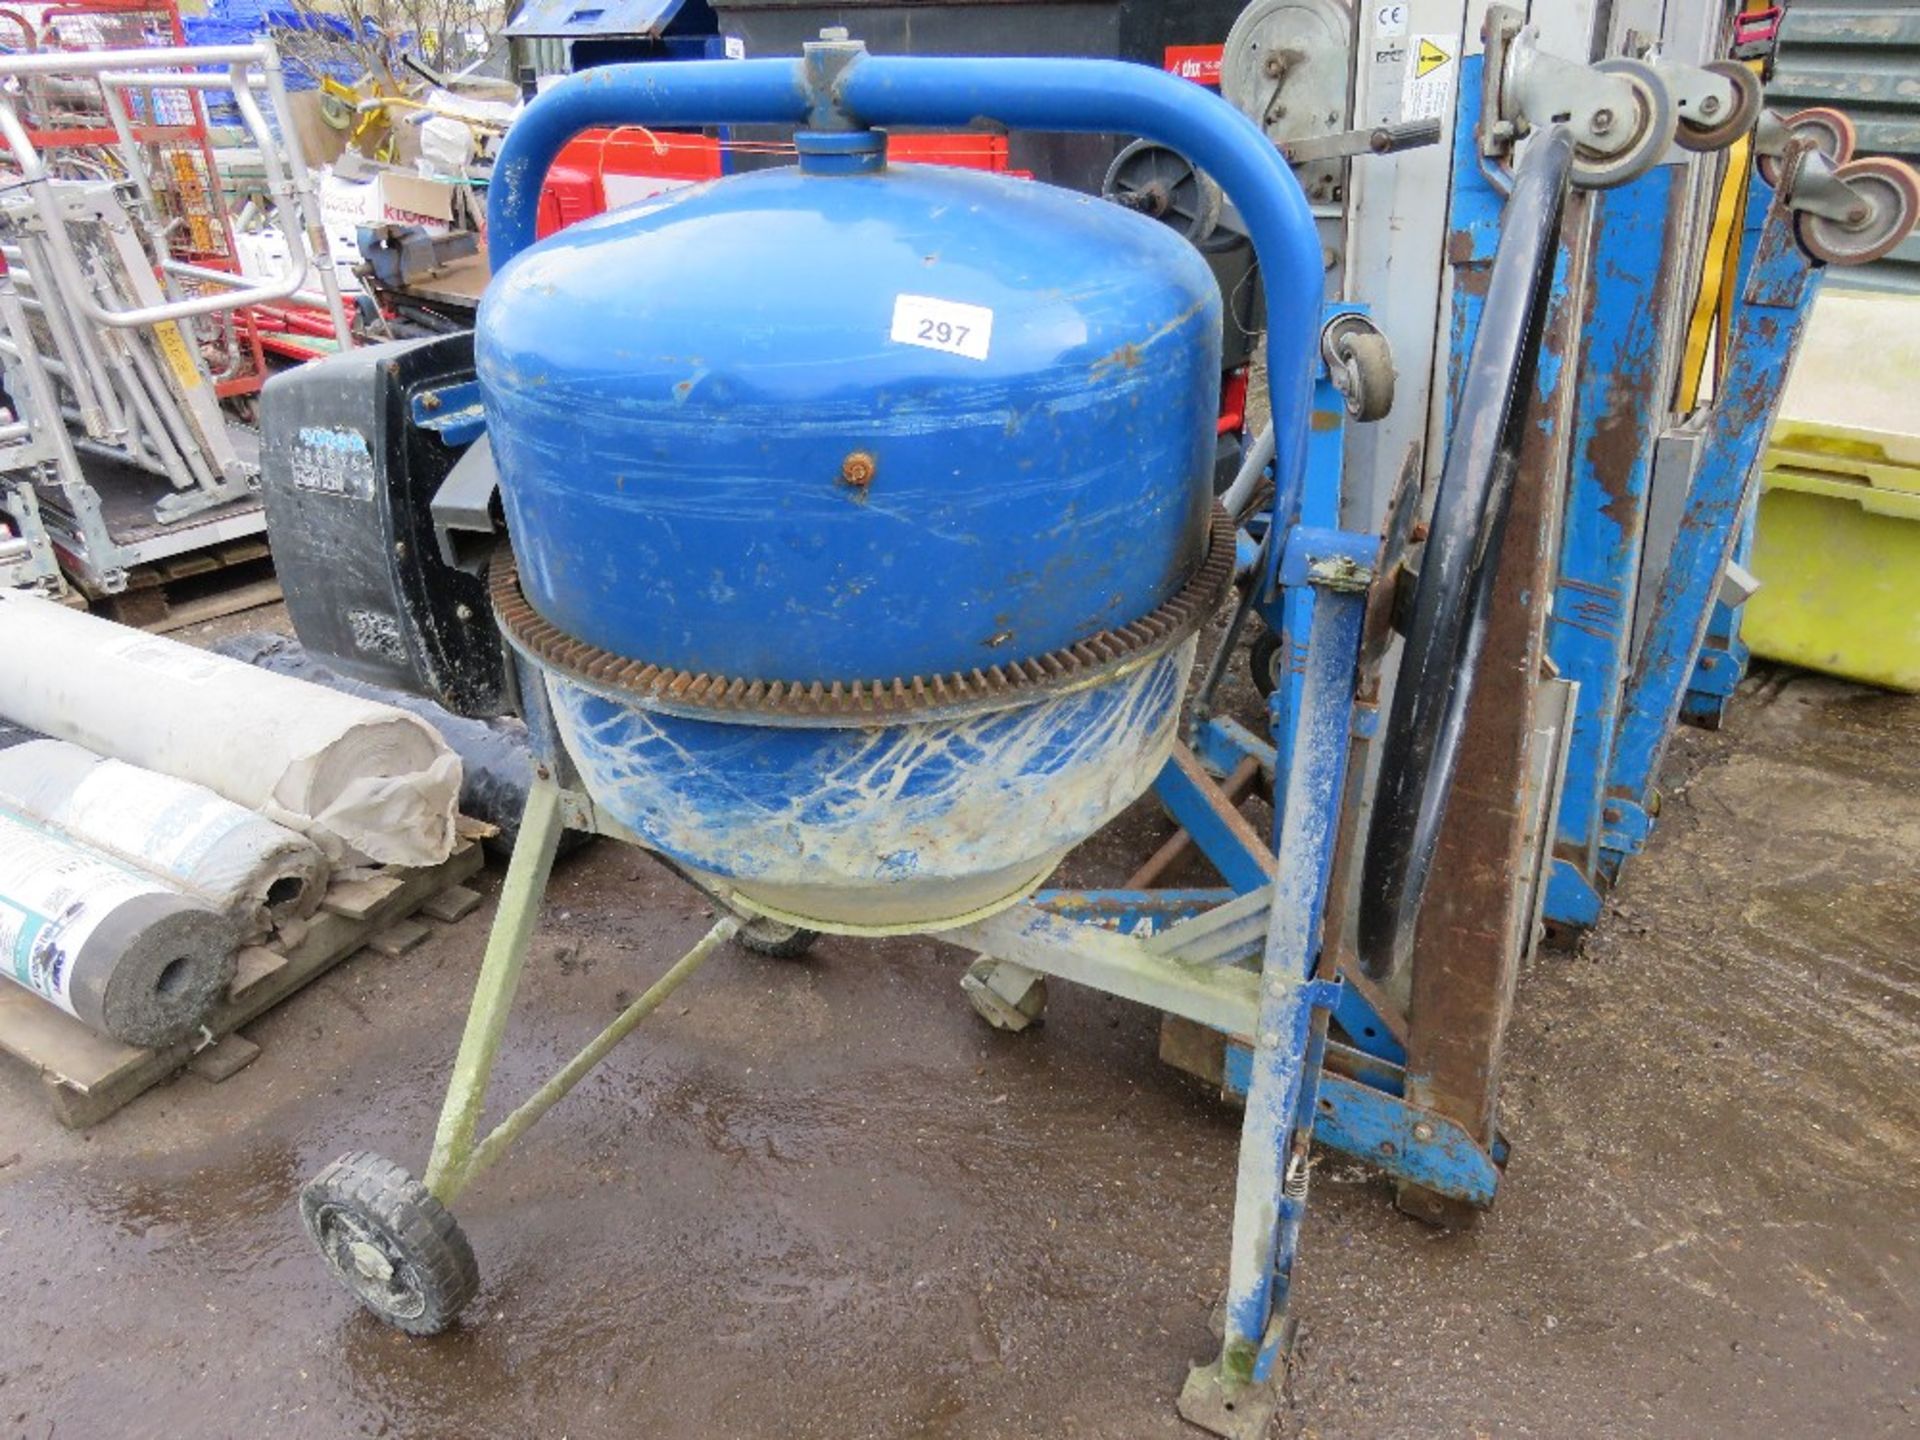 STEPPACH 180 CEMENT MIXER, 240VOLT POWERED. DIRECT FROM LOCAL RETIRING BUILDER. THIS LOT IS SOLD